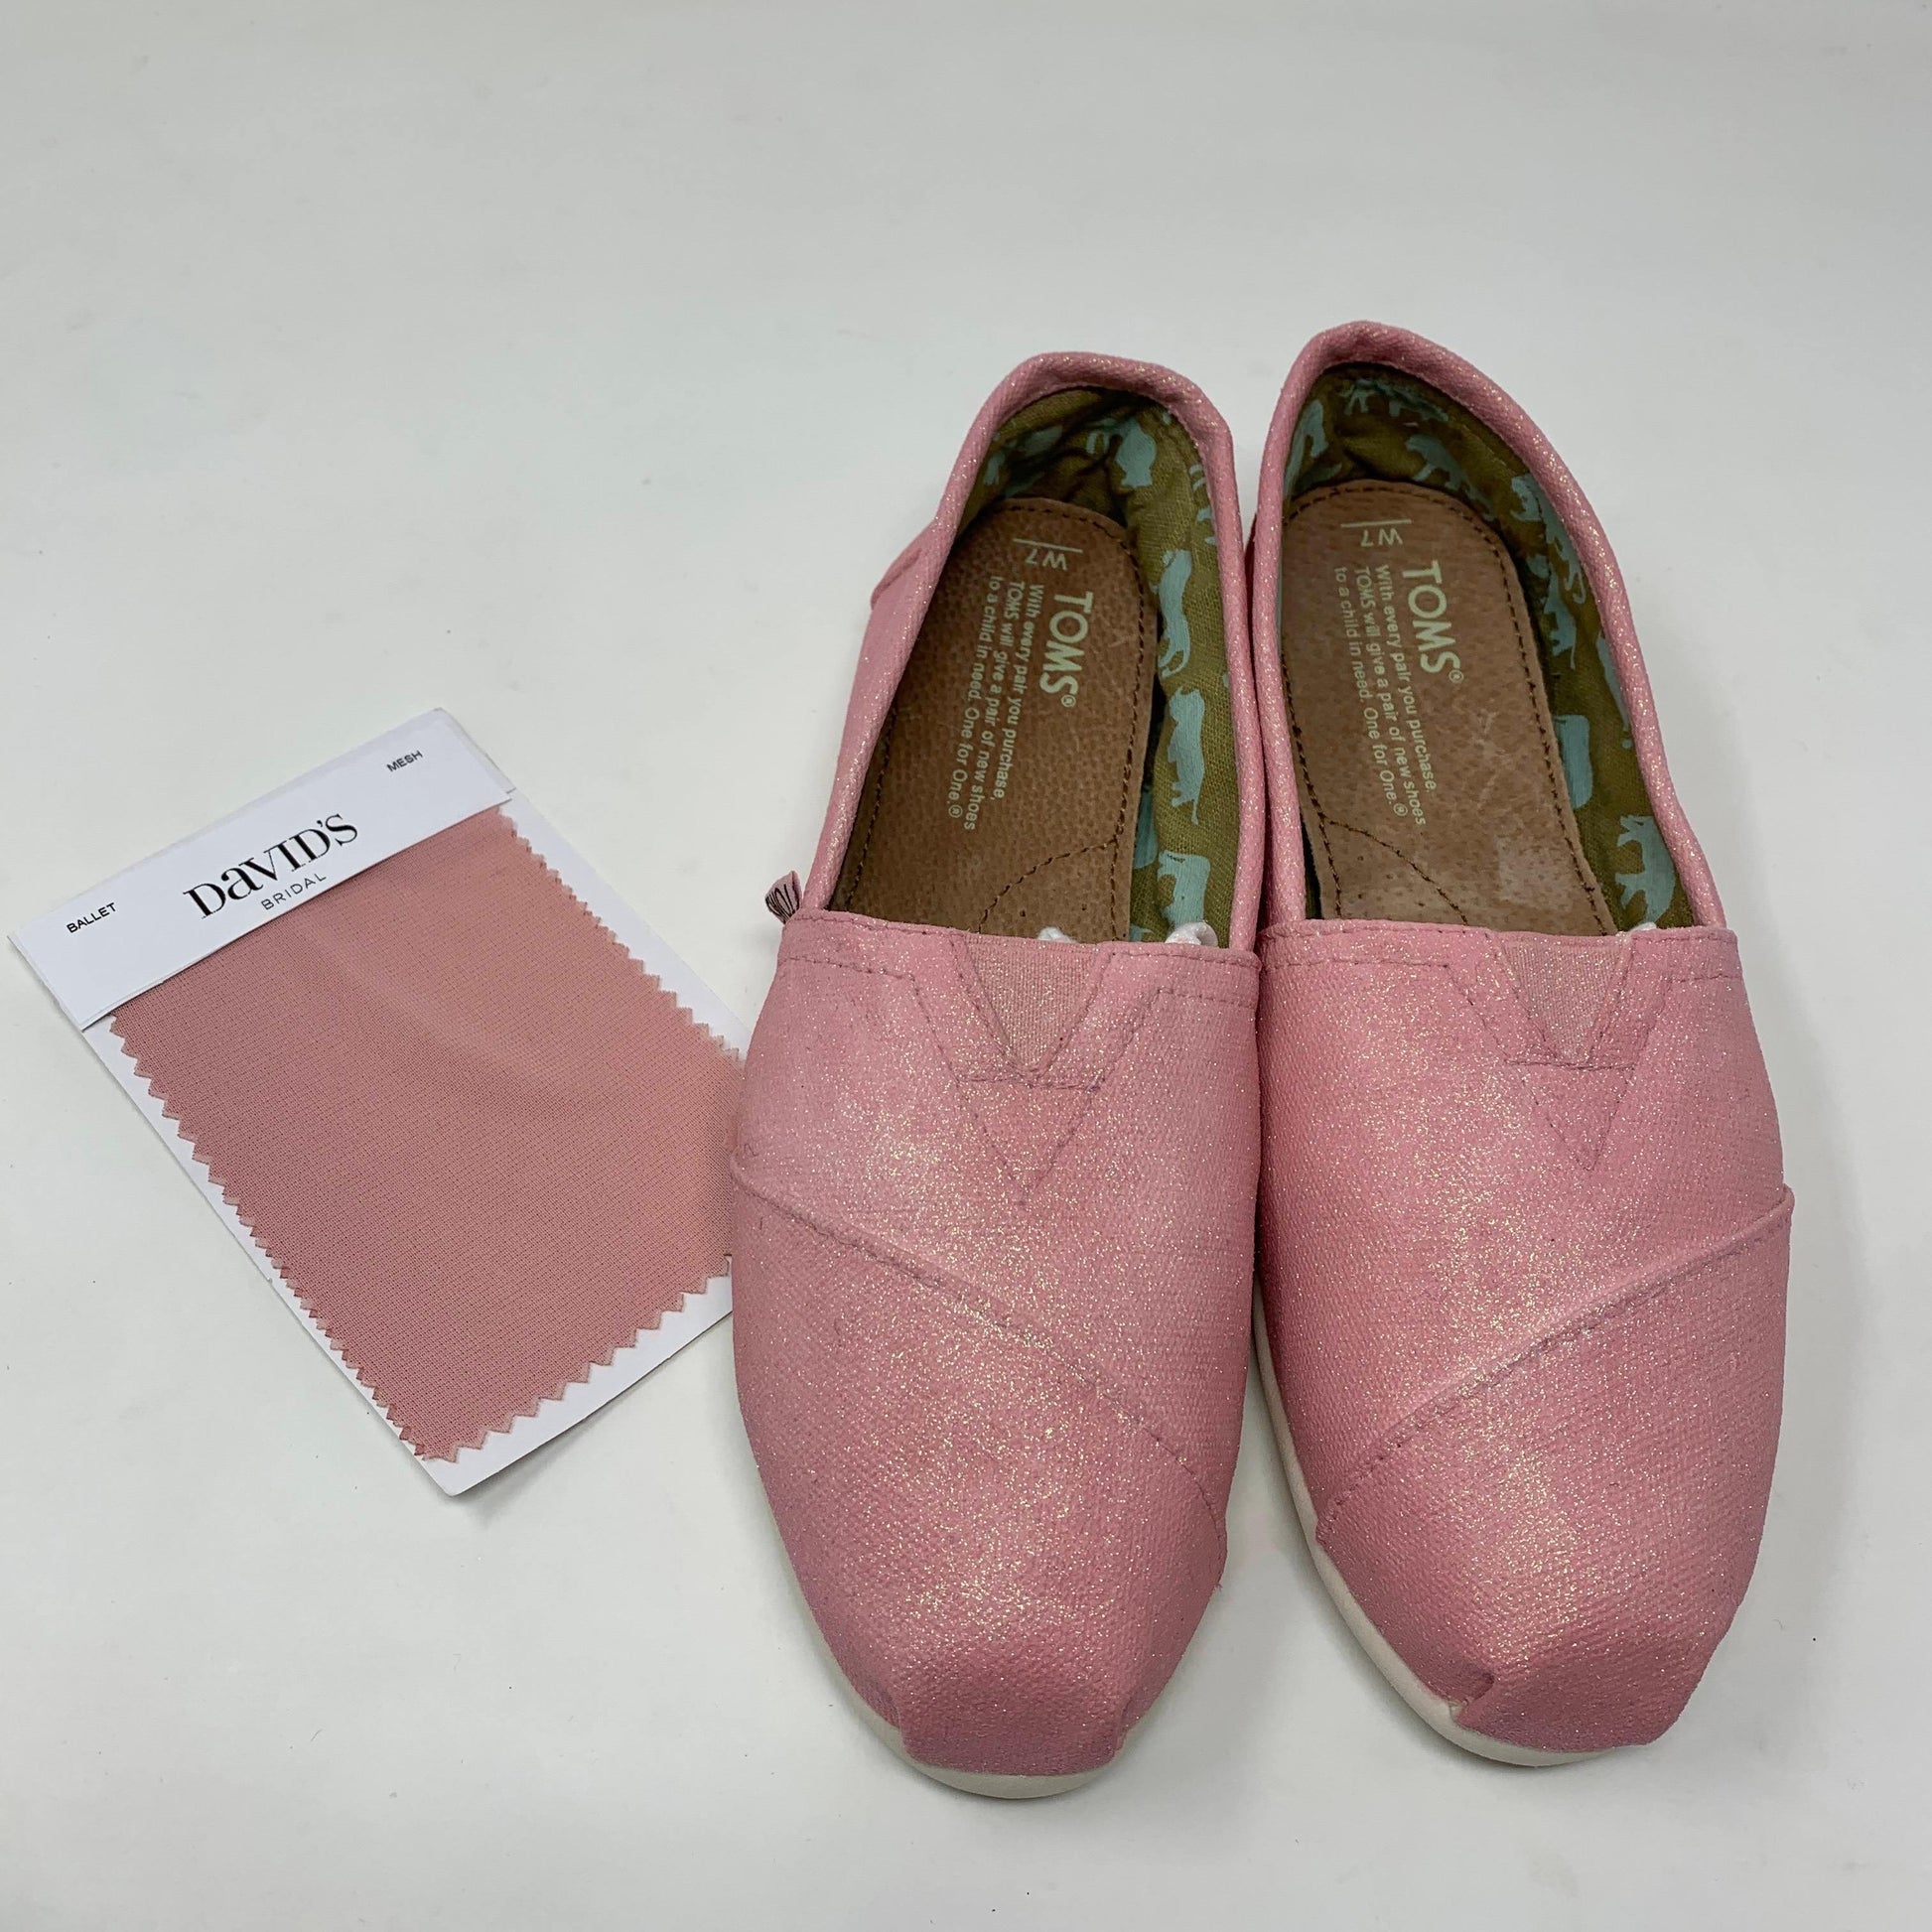 Dusty Rose Glitter Shoes - ButterMakesMeHappy